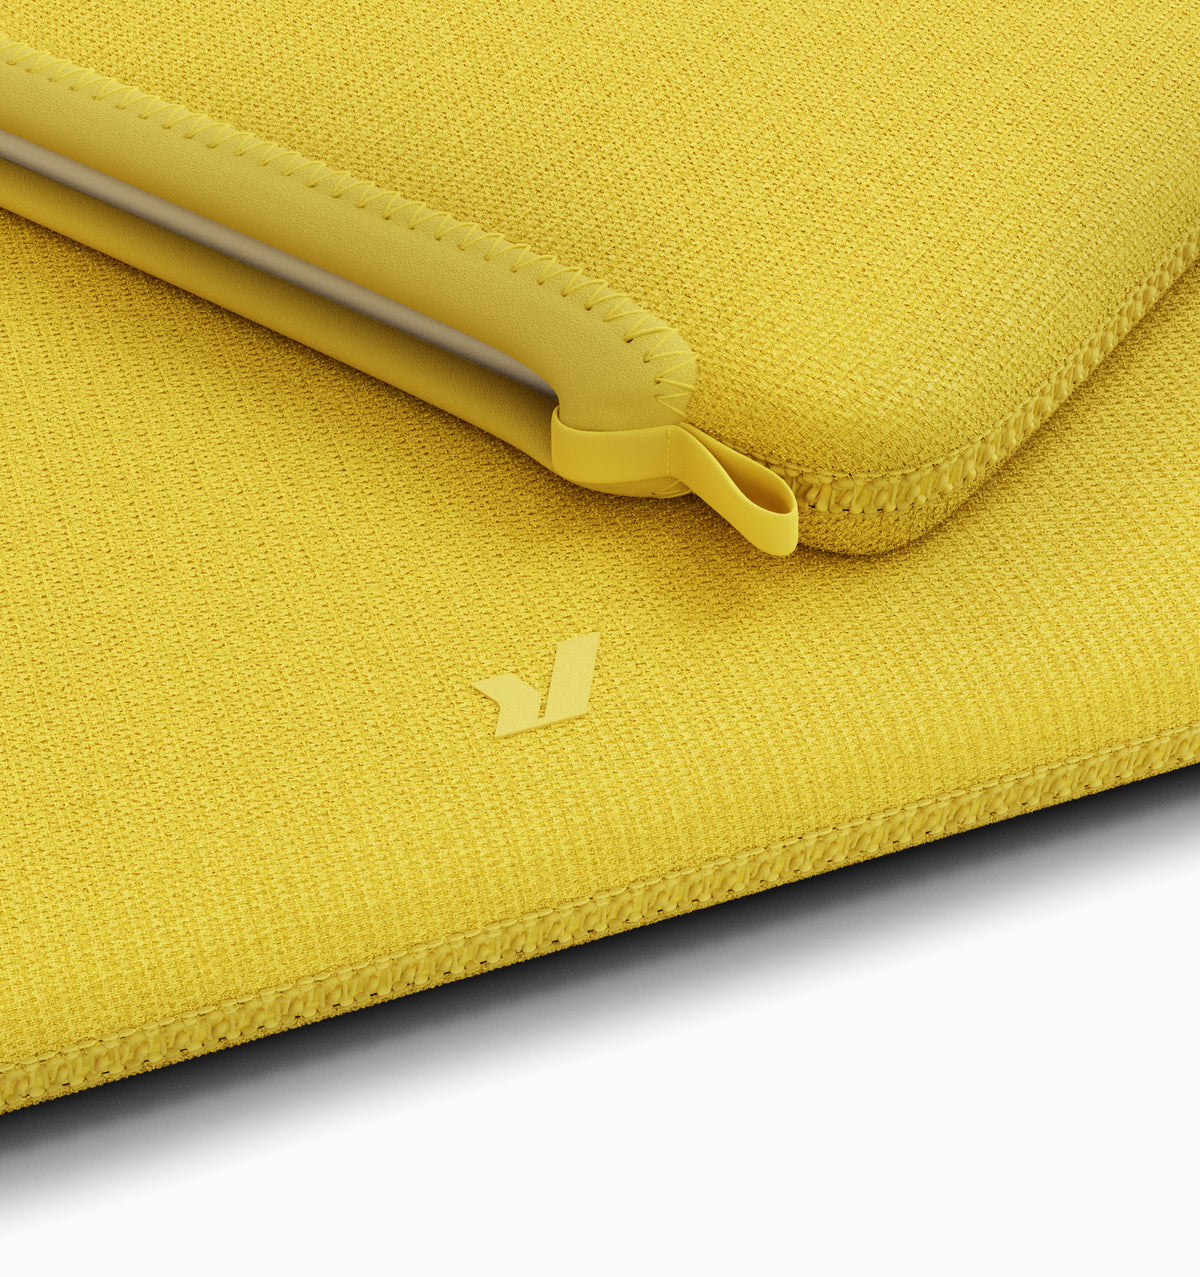 Rushfaster Laptop Sleeve For 13" MacBook Air/Pro - Yellow